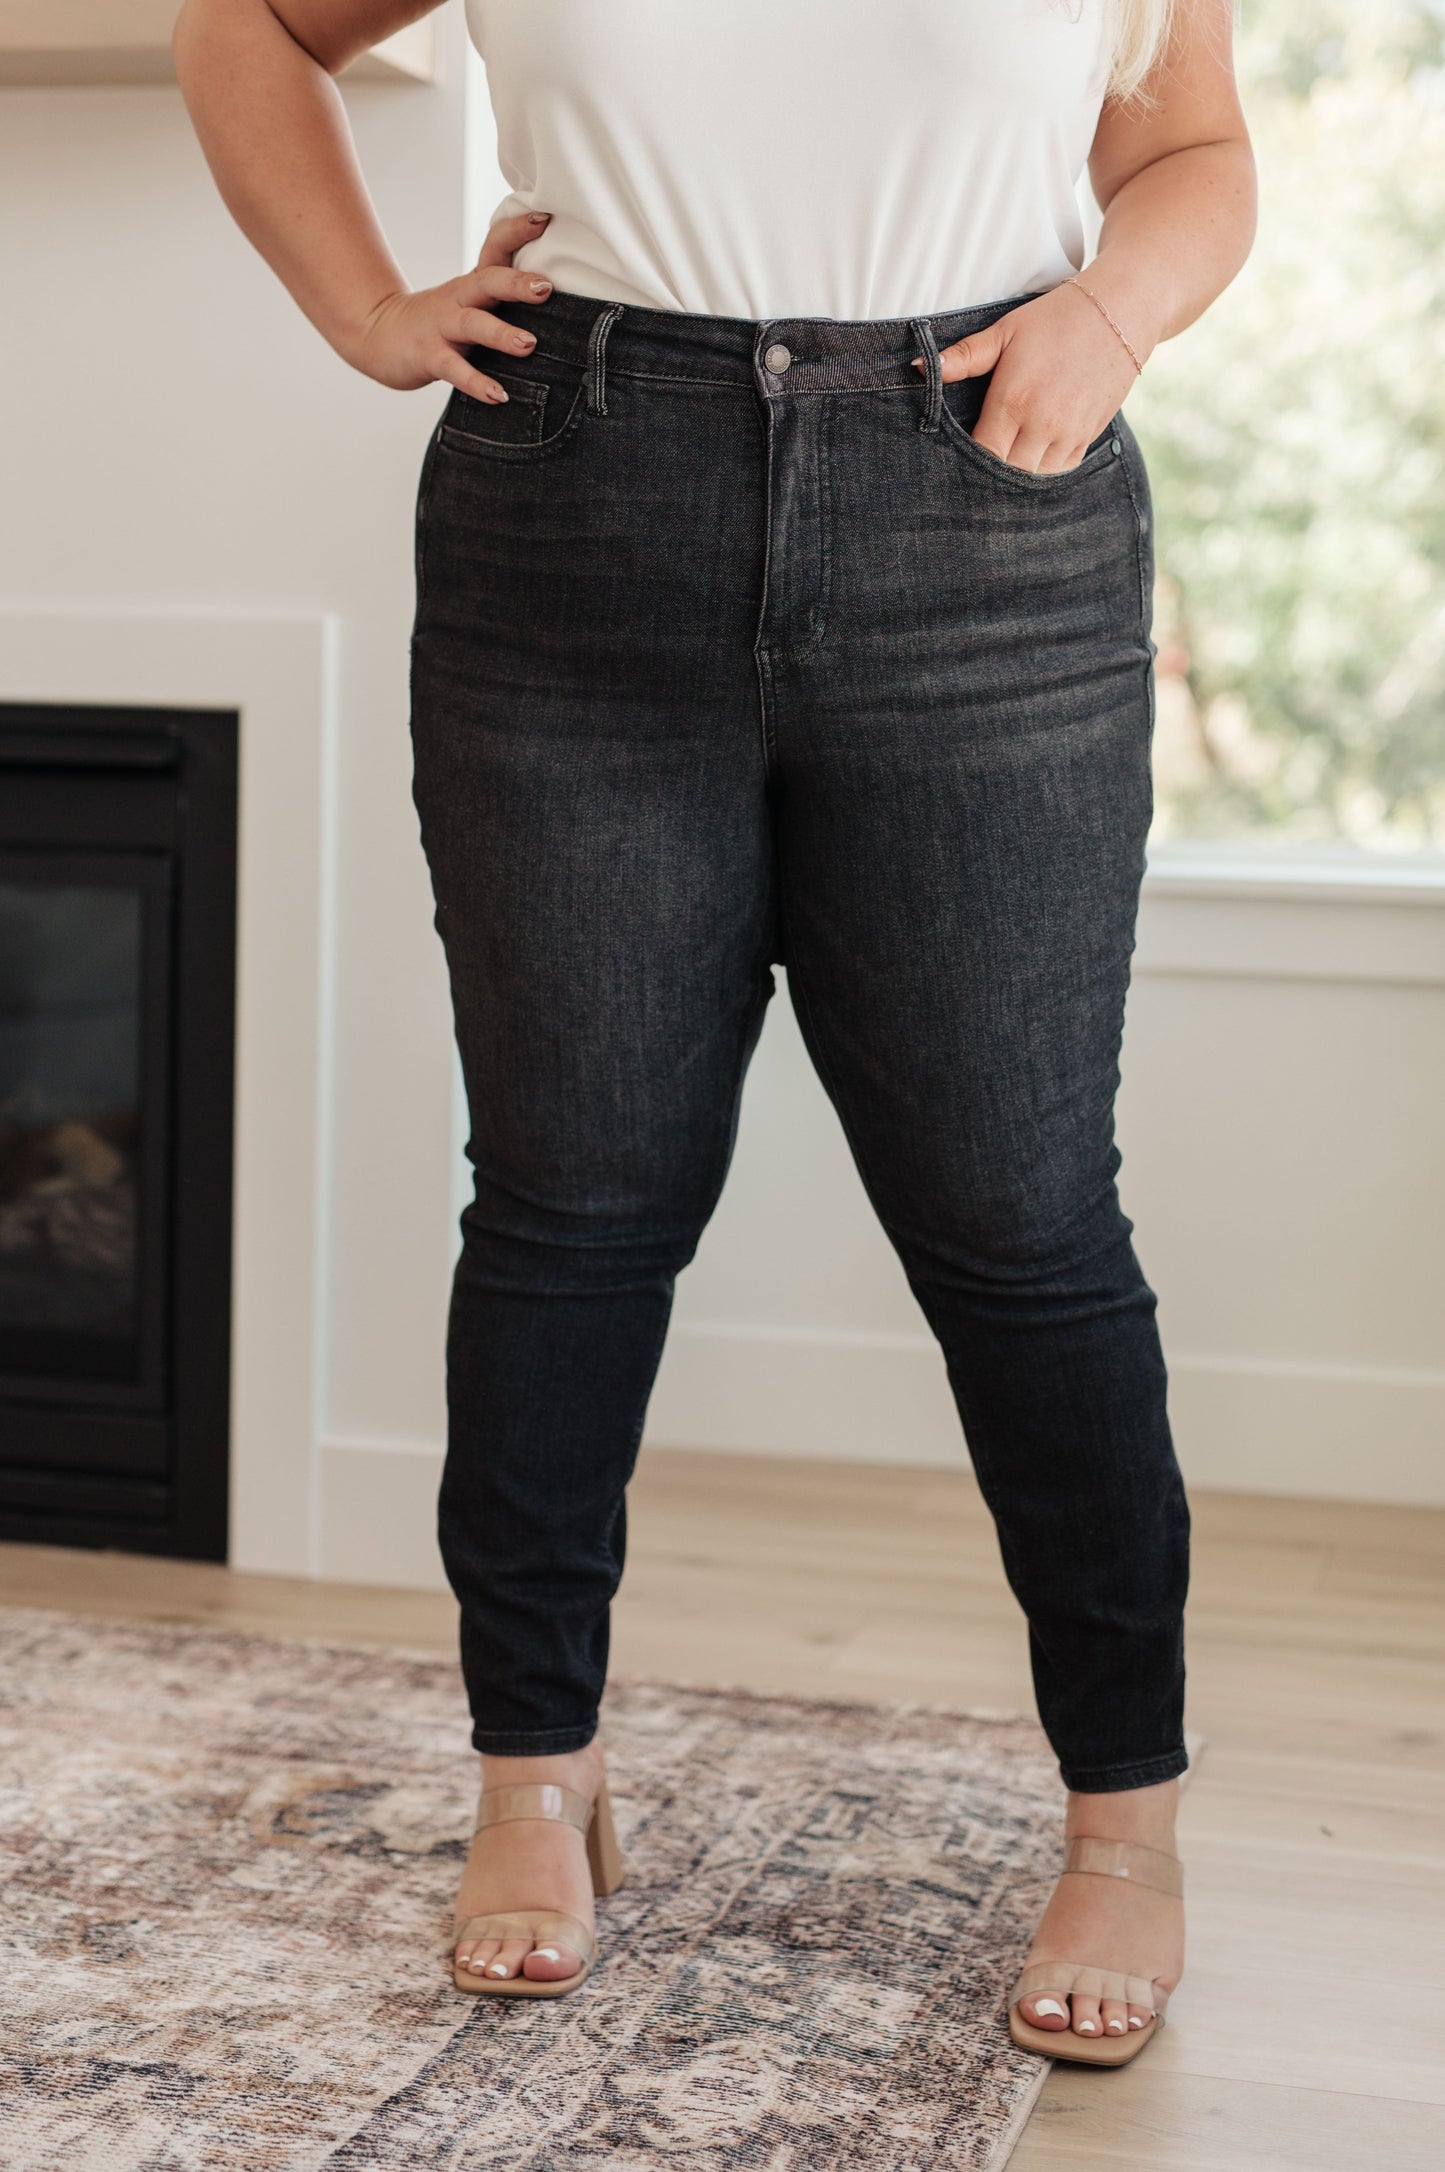 Octavia High Rise Control Top Skinny Jeans in Washed Black - FamFancy Boutique